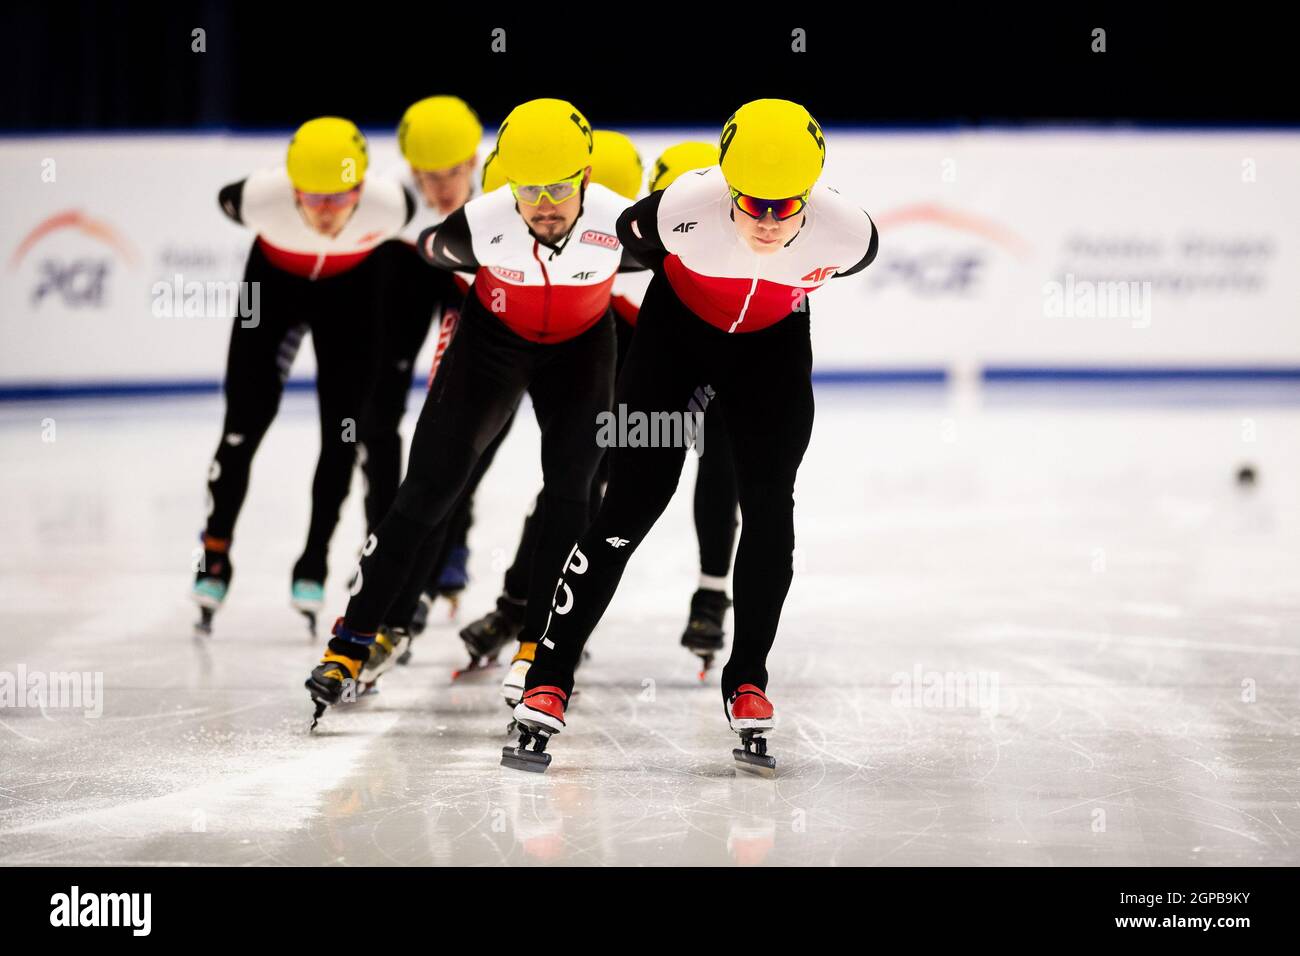 Michal Niewinski seen in action Short Track Speed Skating Polish Ranking Cup 2021 at the Hala Olivia Stock Photo - Alamy